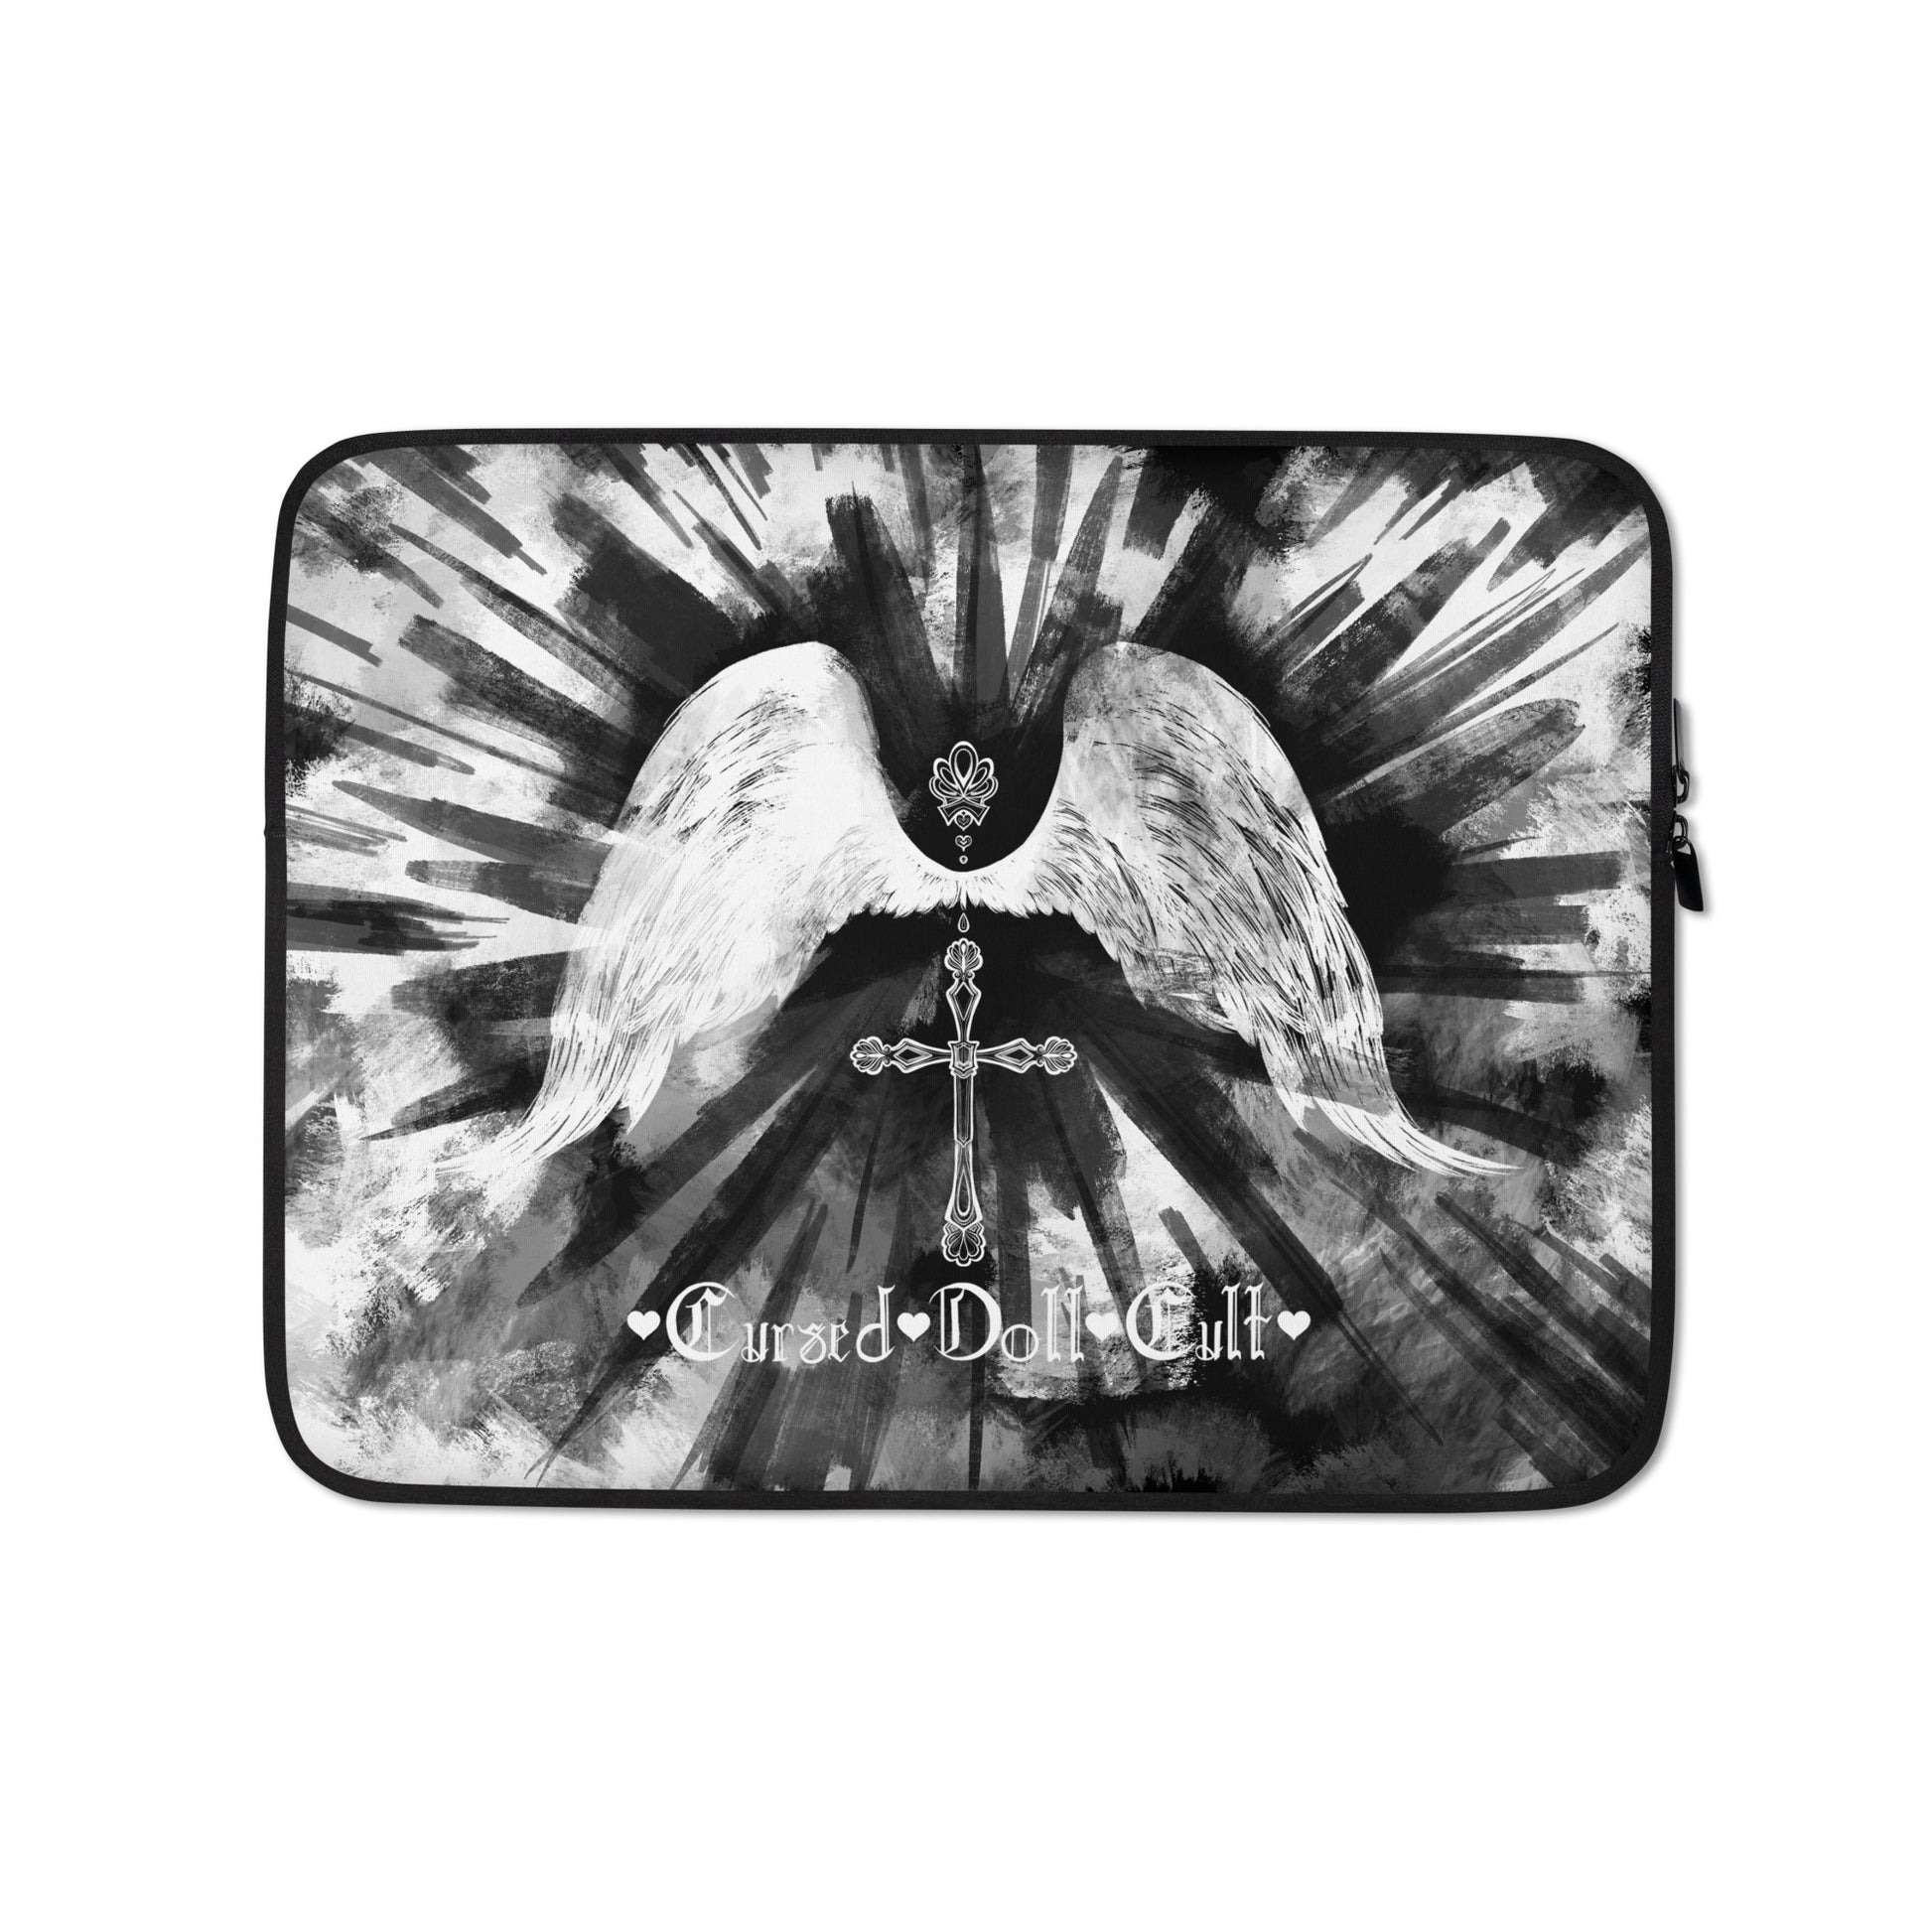 Gothic Laptop Sleeve with angel wings